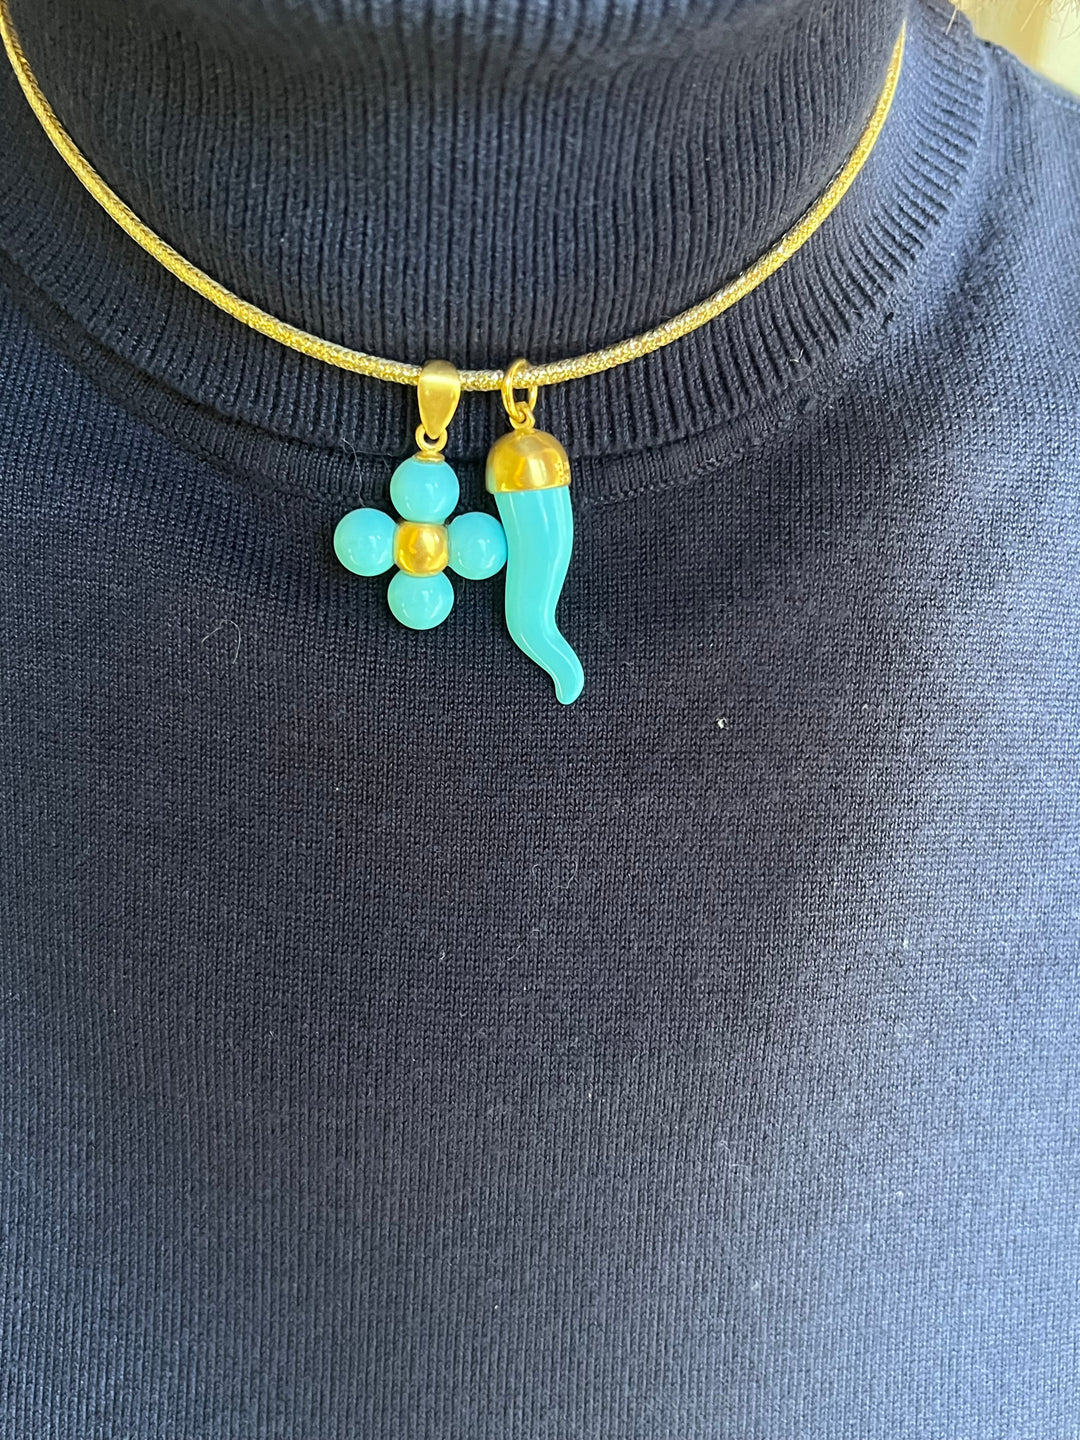 Adjustable Magnetic Necklace Cord